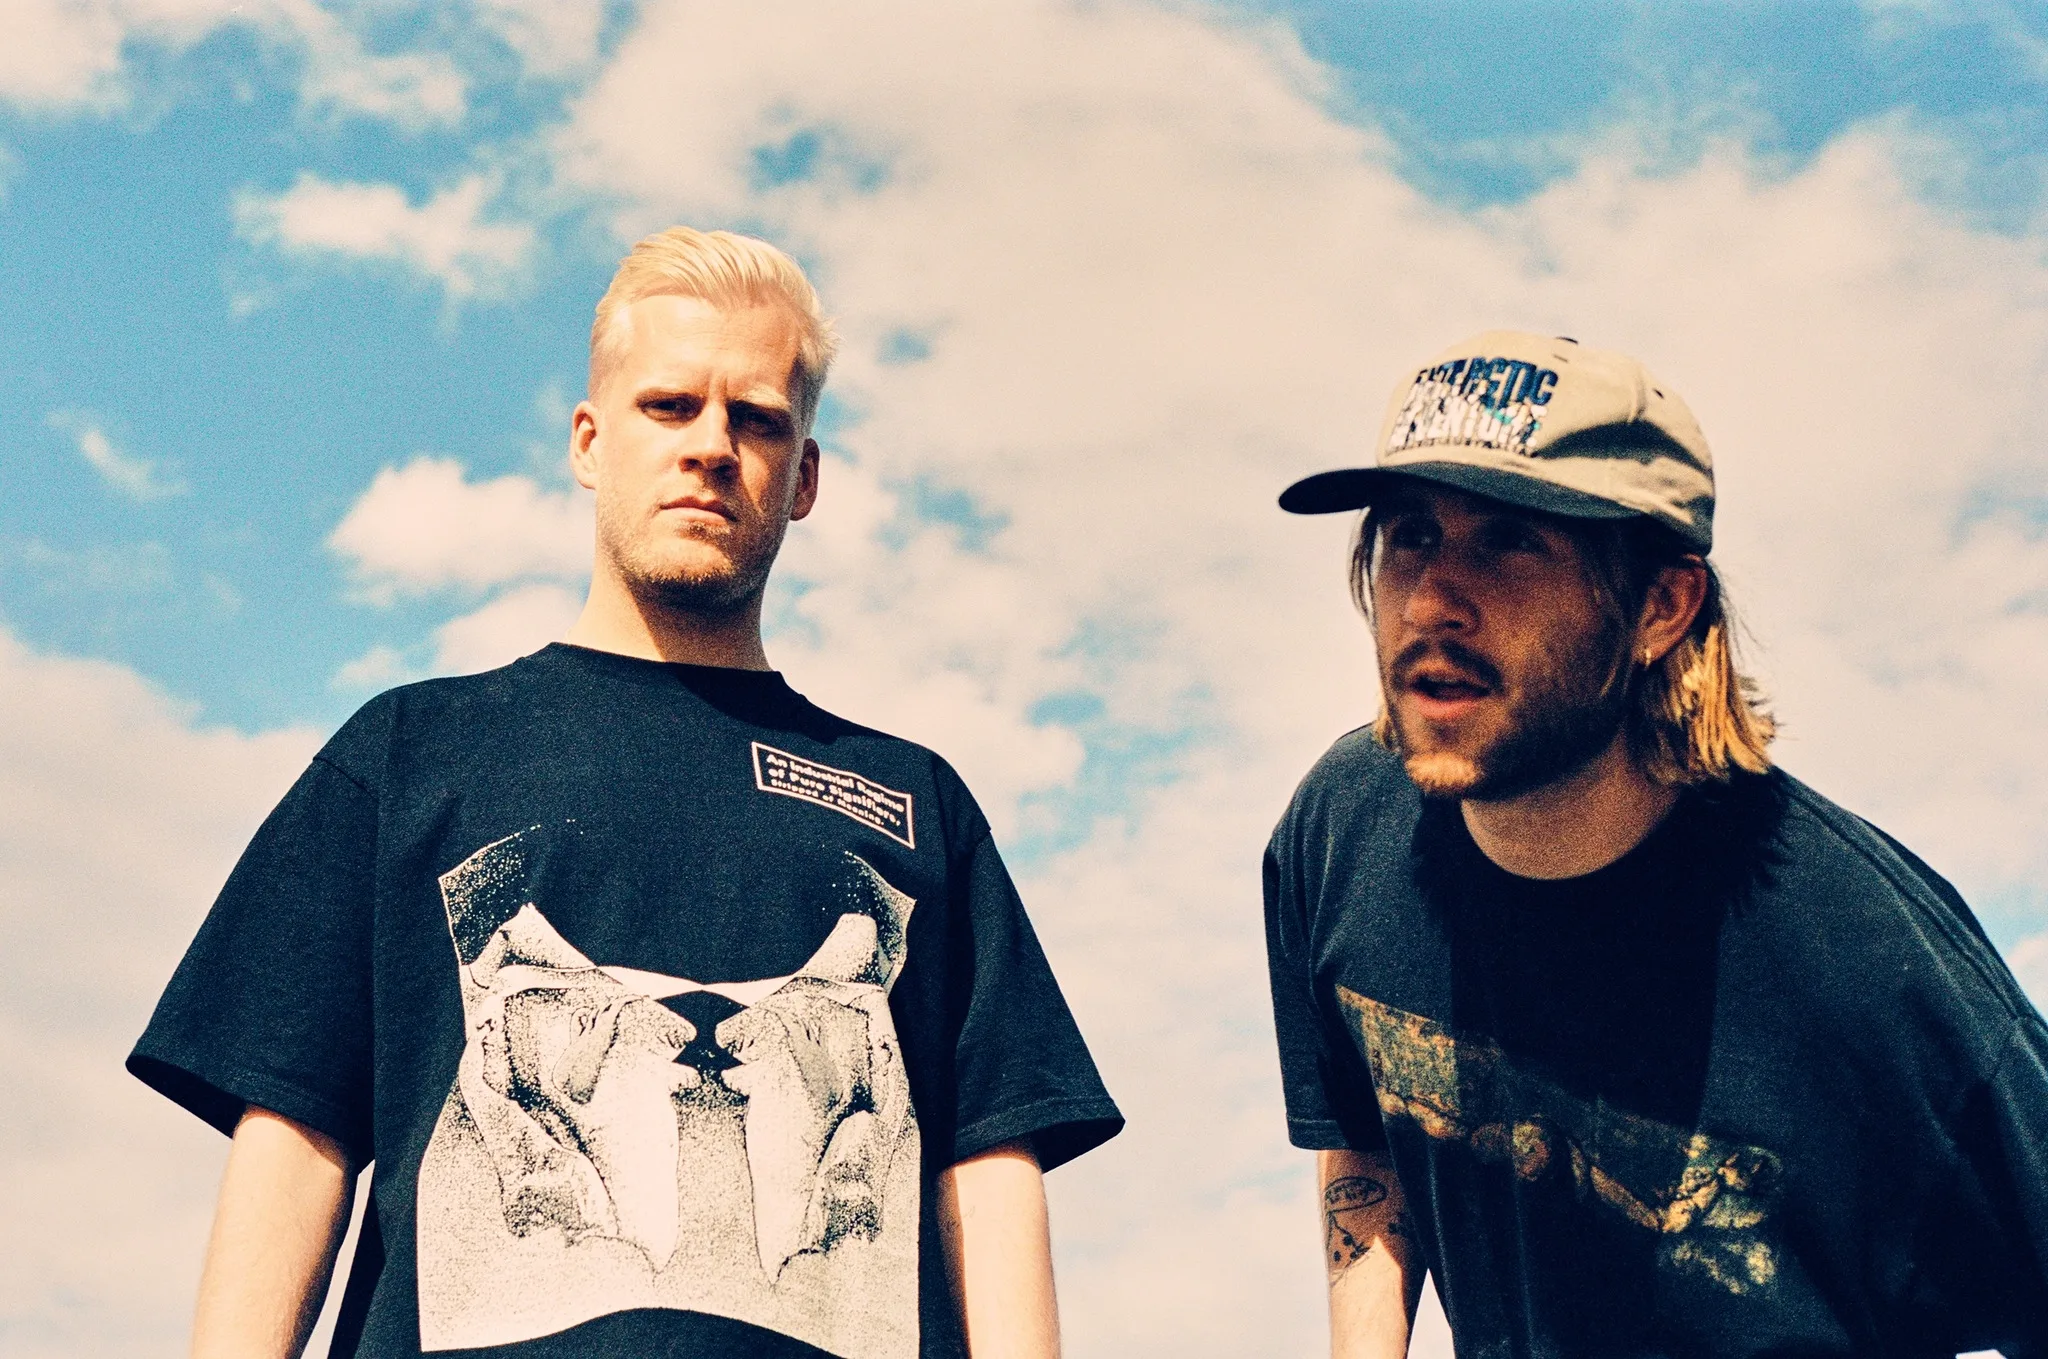 Oliver Lee and James Carter, musicians of Snakehips pose against a cloudy, blue sky.